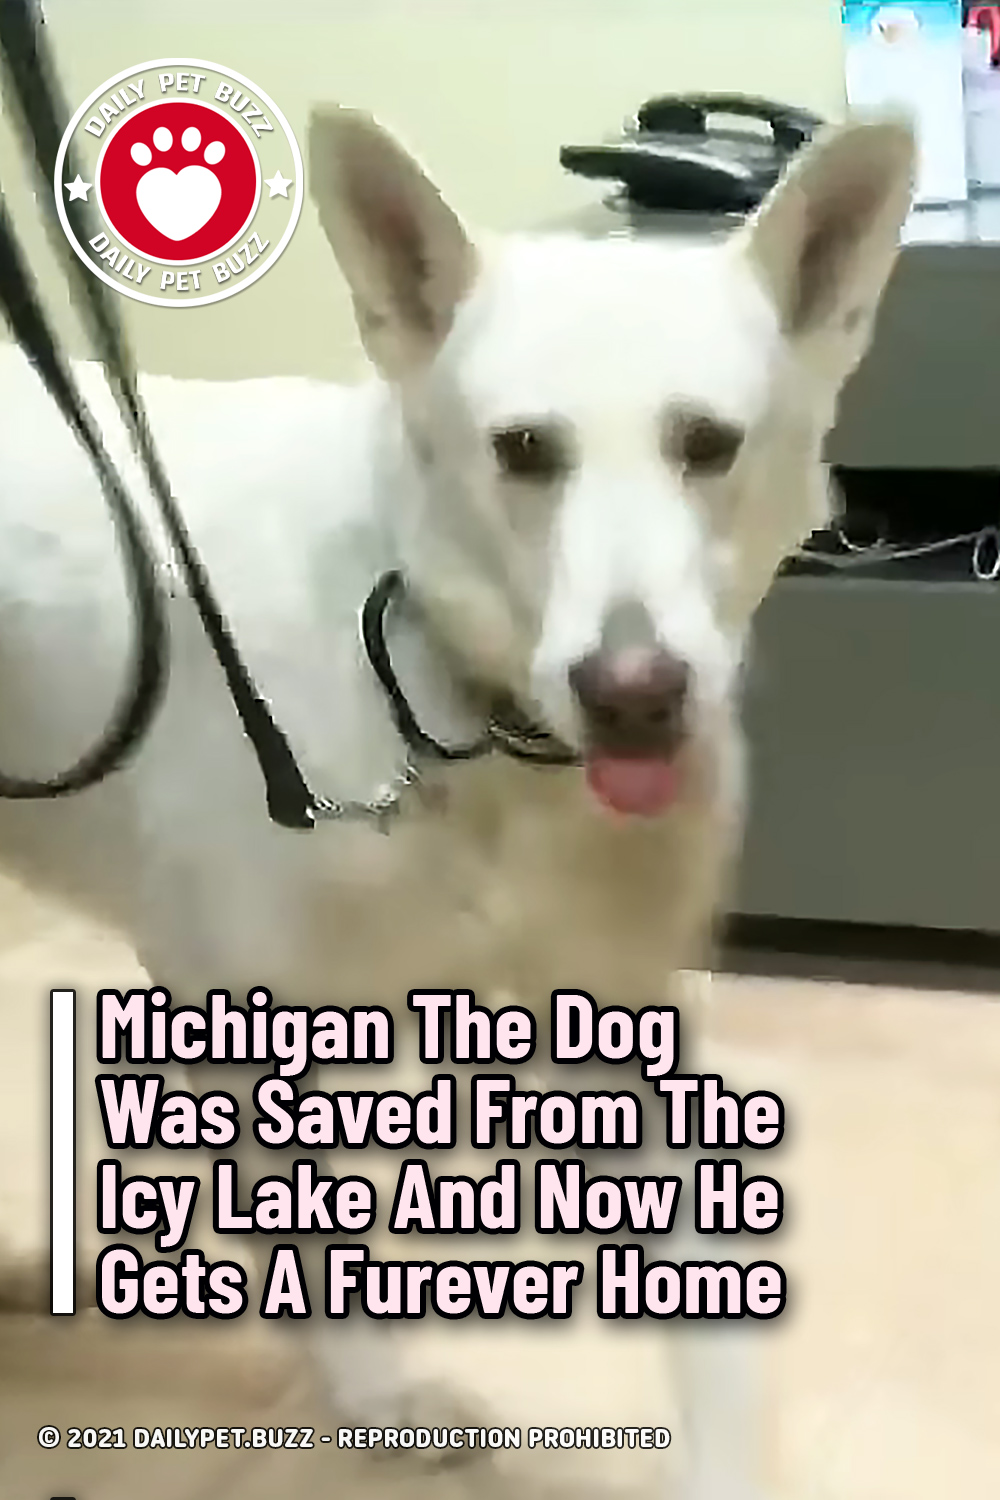 Michigan The Dog Was Saved From The Icy Lake And Now He Gets A Furever Home